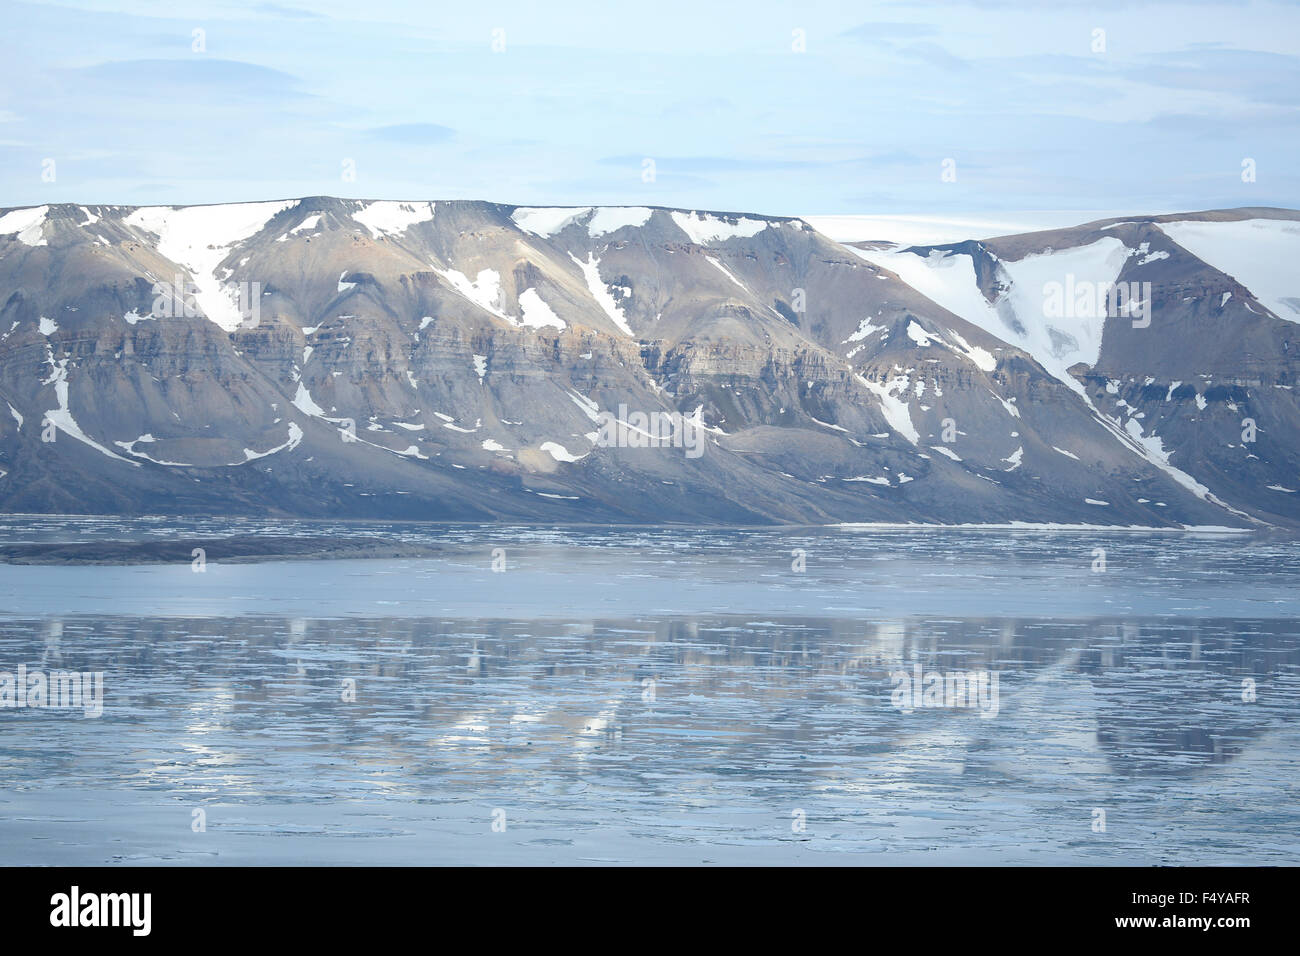 Arctic, Svalbard, Faksevagen, Fakse Bay. View of mountains and icy water. Stock Photo